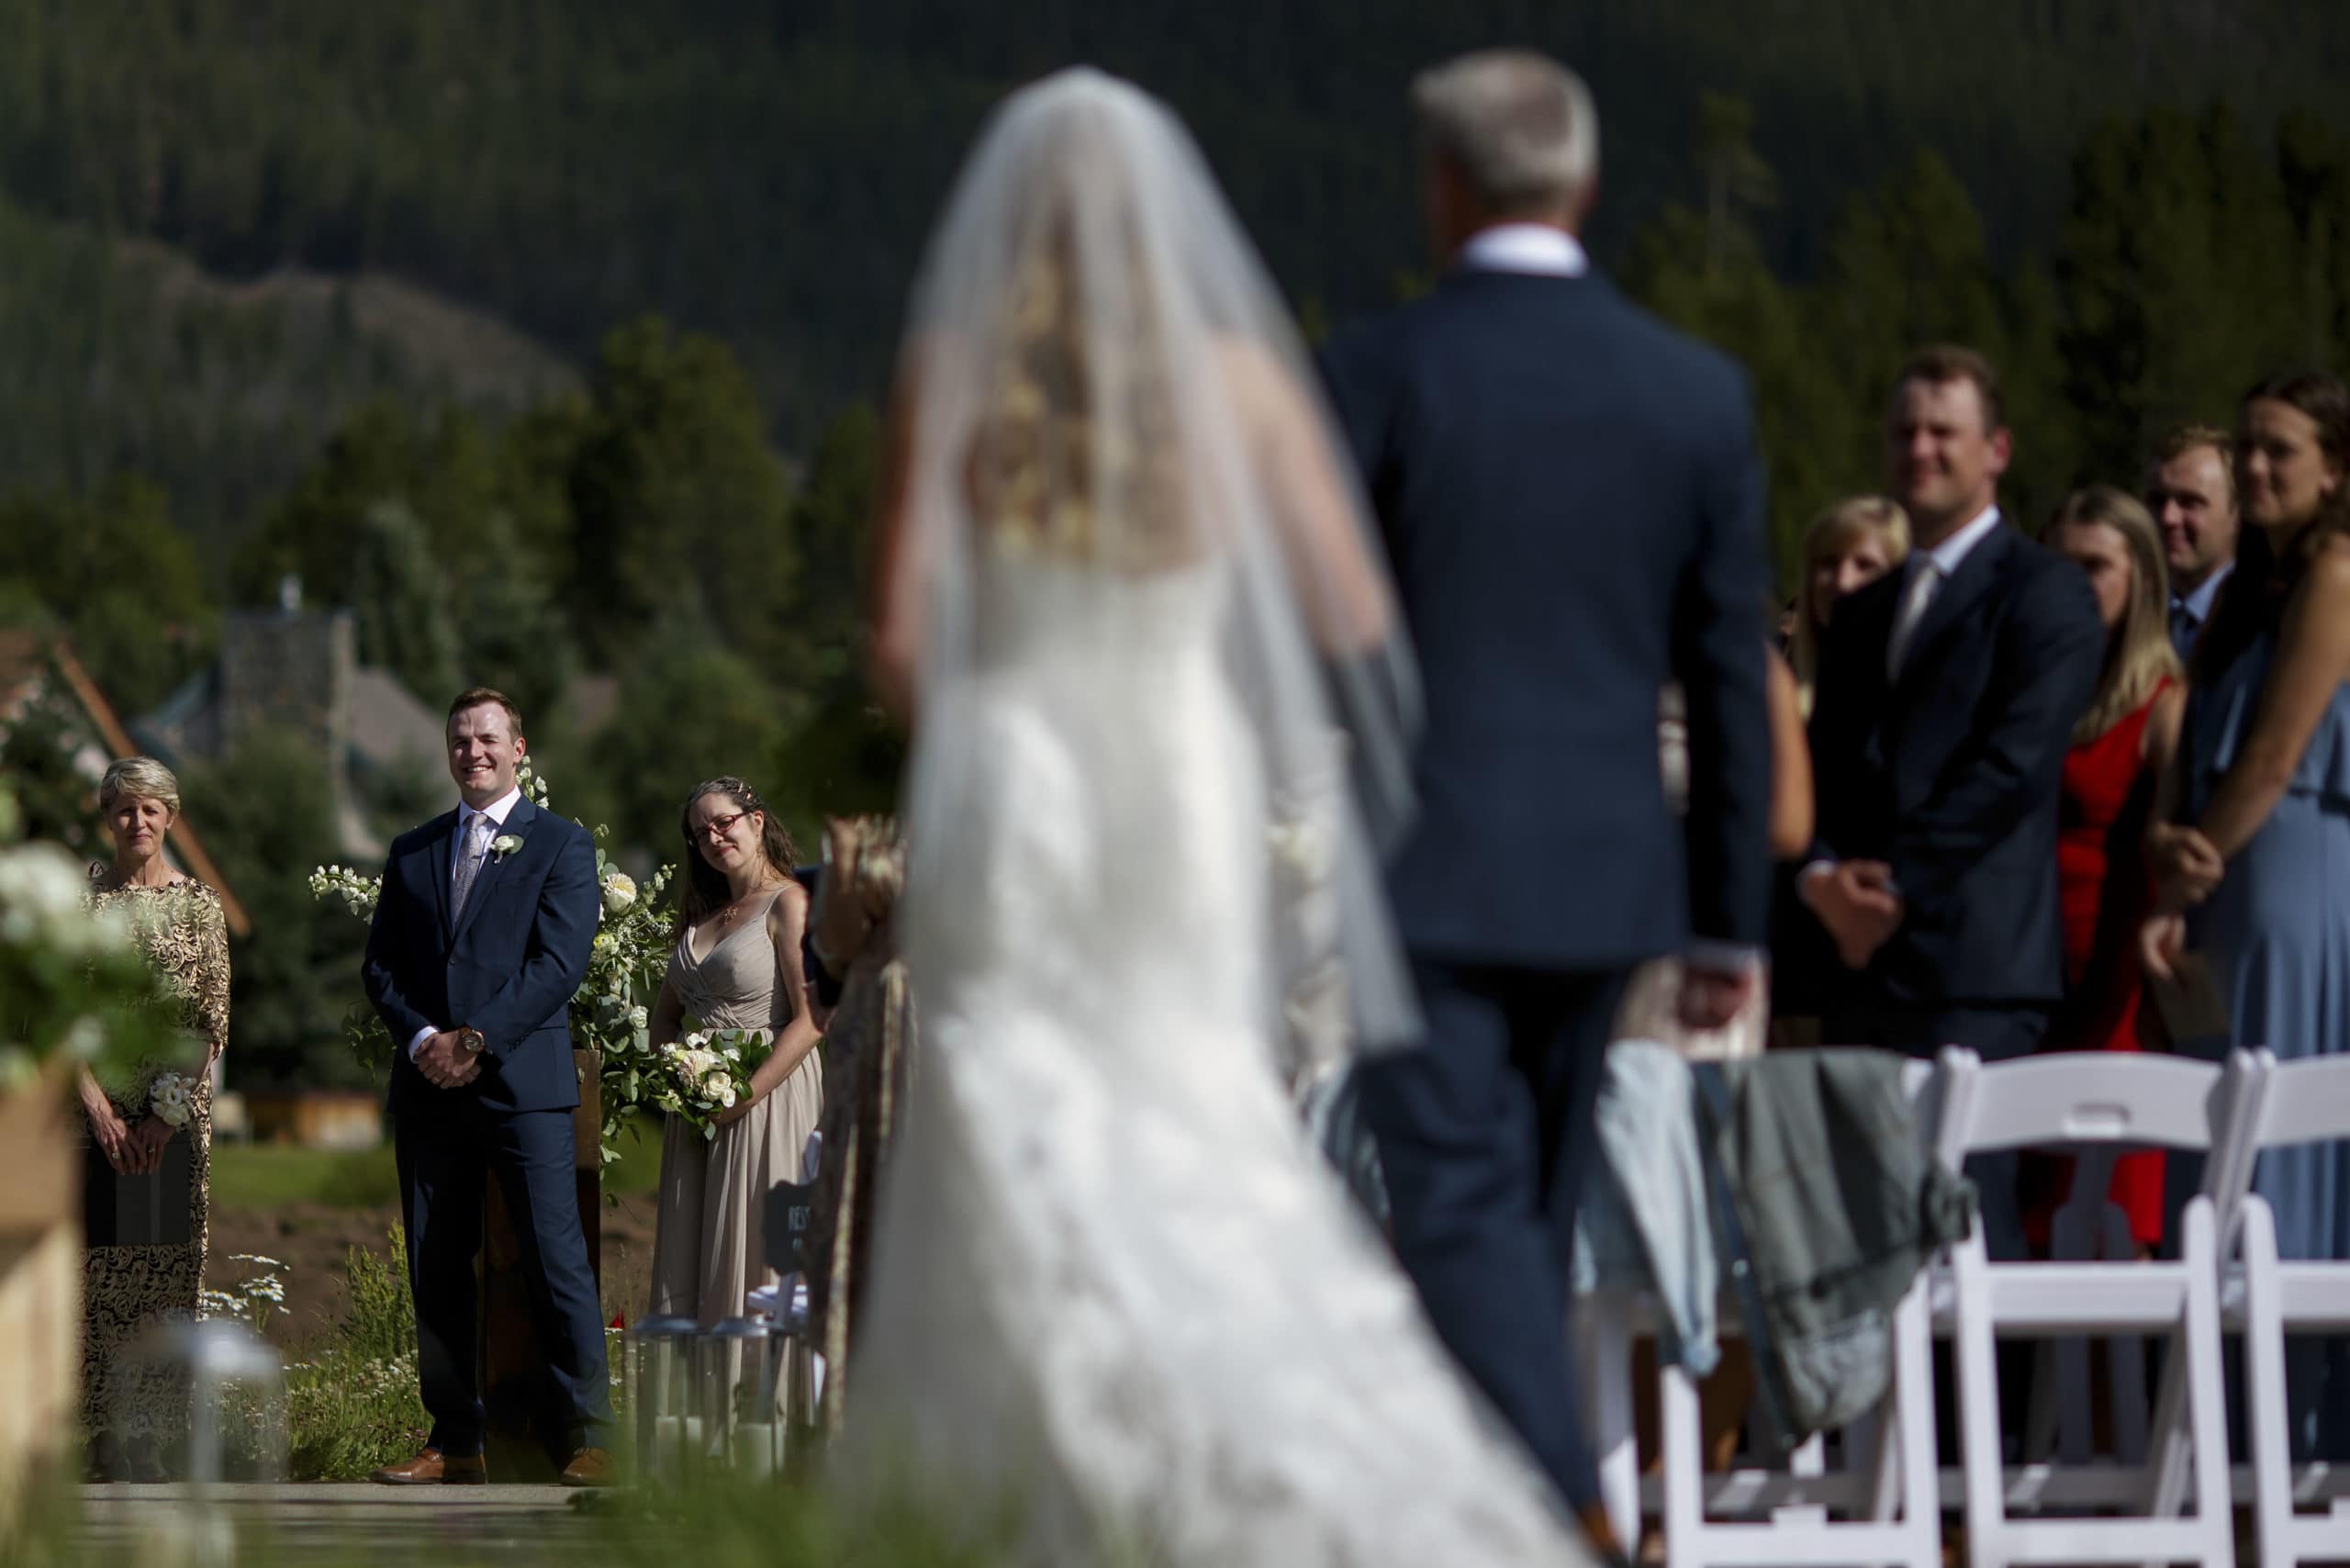 The groom looks on as the bride walks down the aisle during their wedding ceremony at Copper VIsta